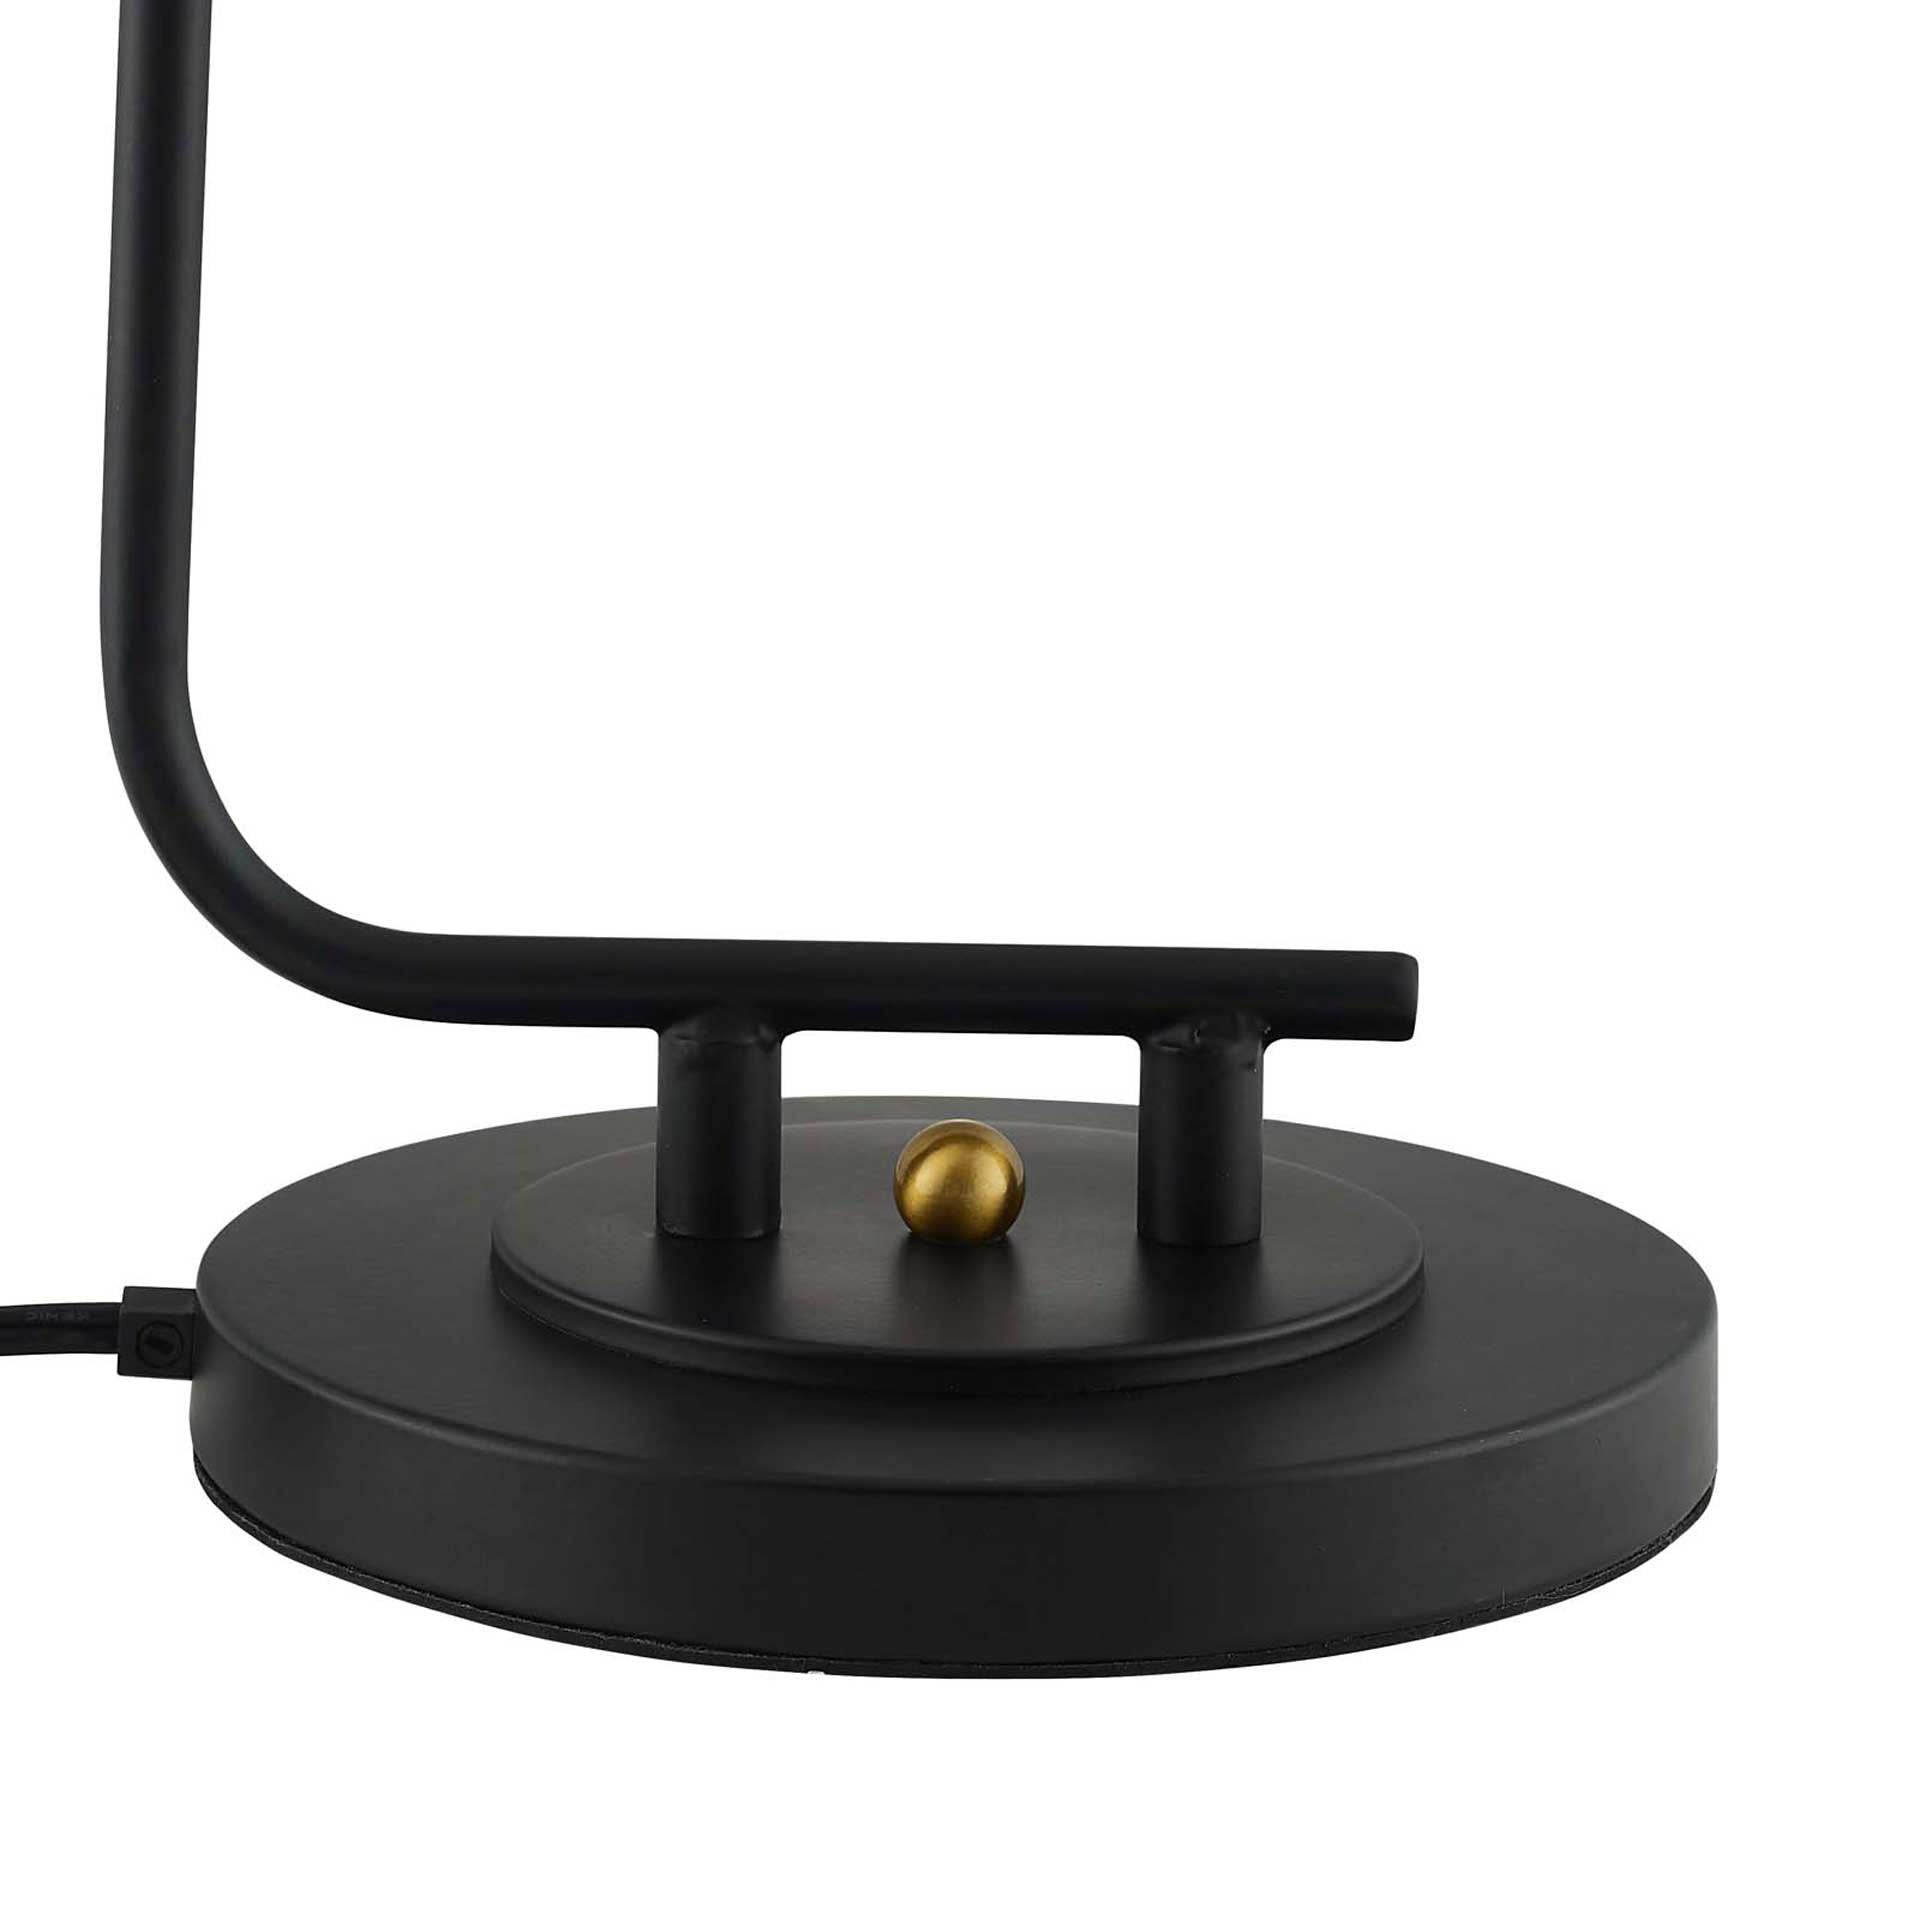 Anabelle Table Lamp Black/Gold